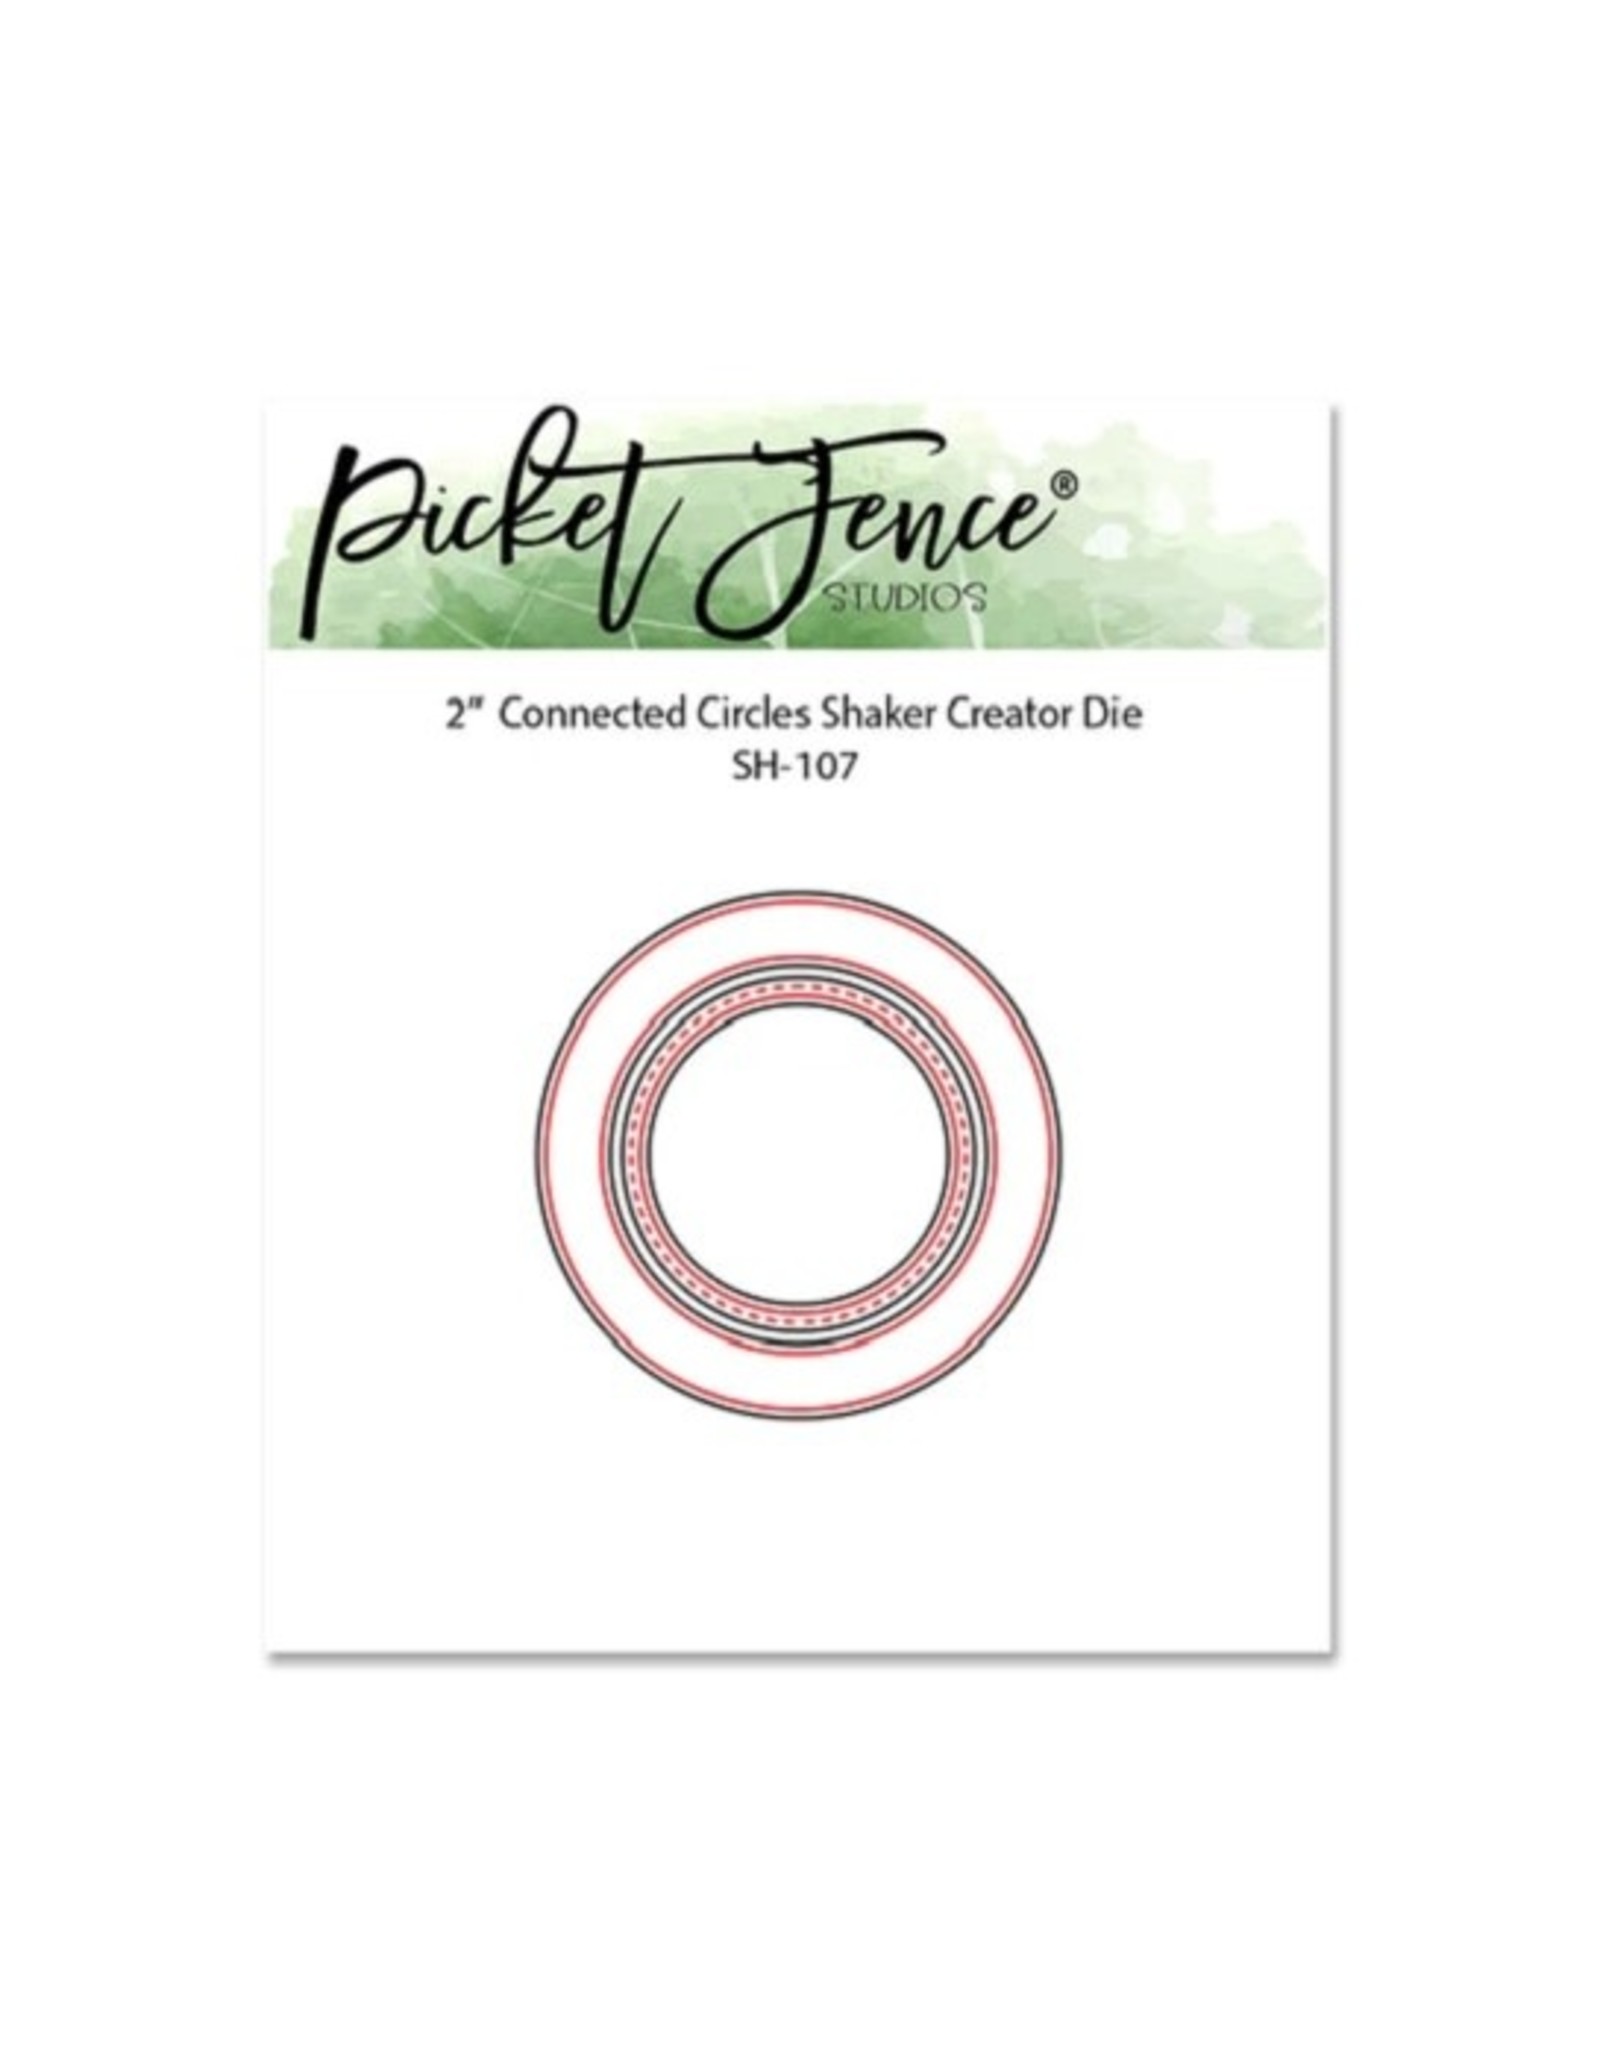 PICKET FENCE STUDIOS Connected Circles Shaker Creator Die   2.0